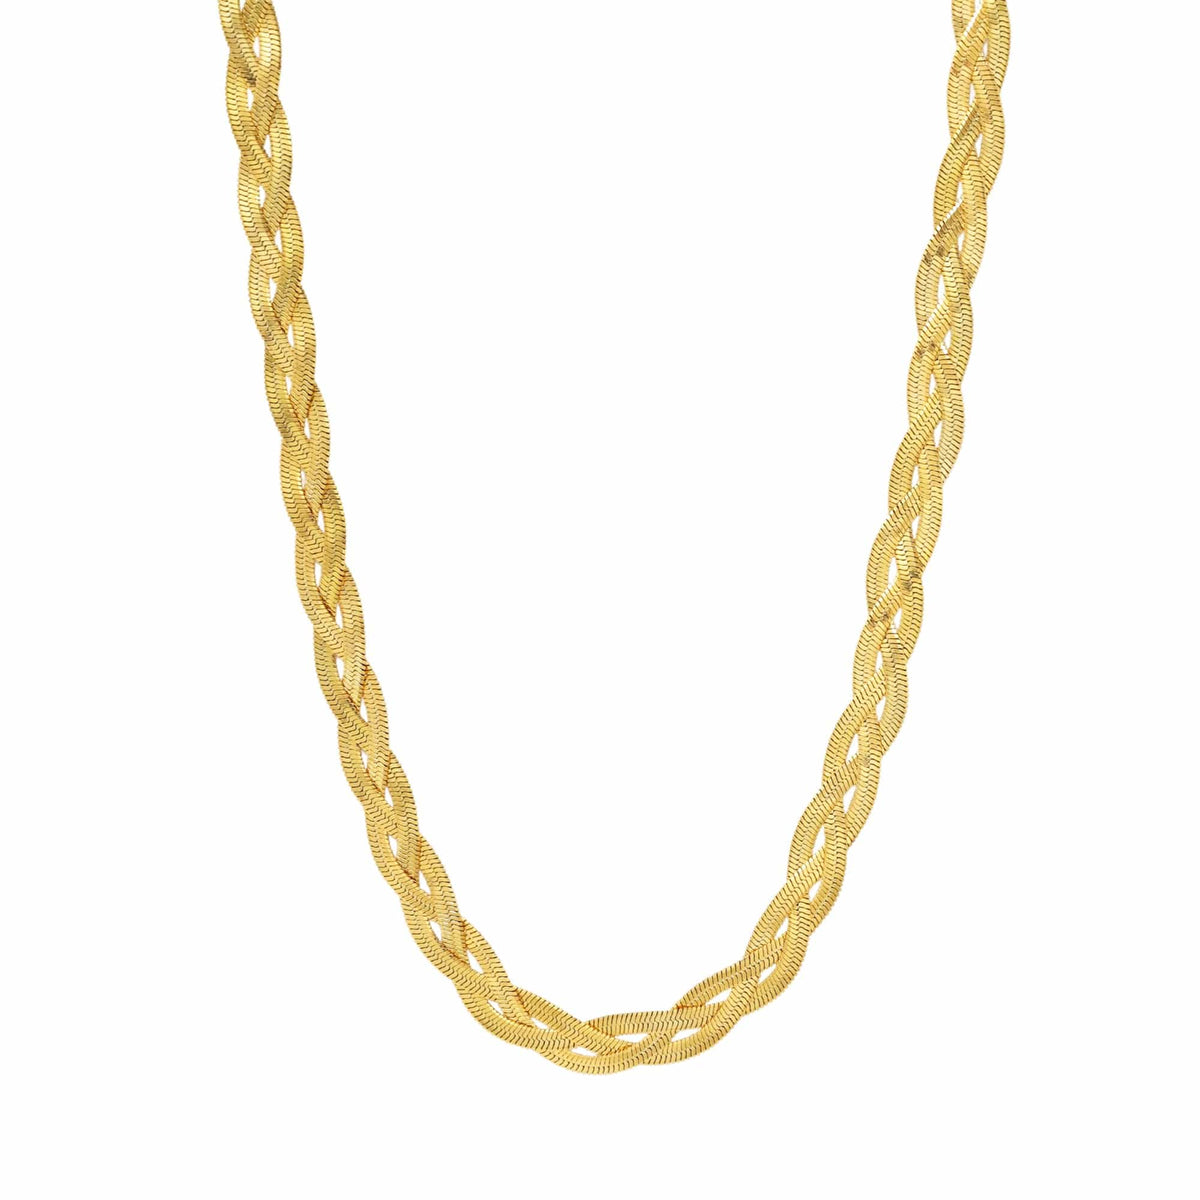 BohoMoon Stainless Steel Dahlia Necklace Gold